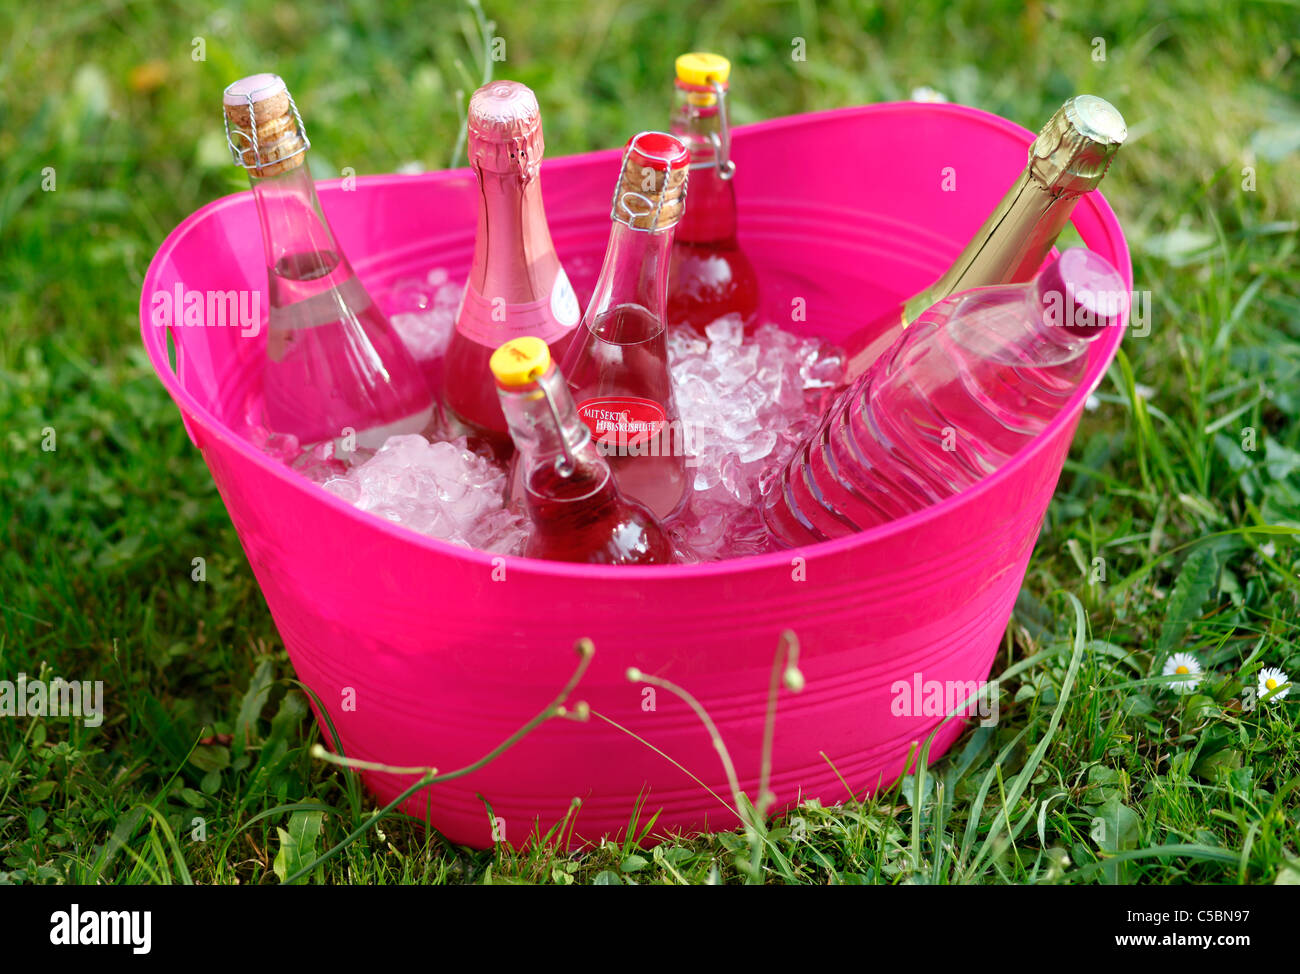 Cooling bottles  with icecubes in a huge pink plastic container in the garden Stock Photo